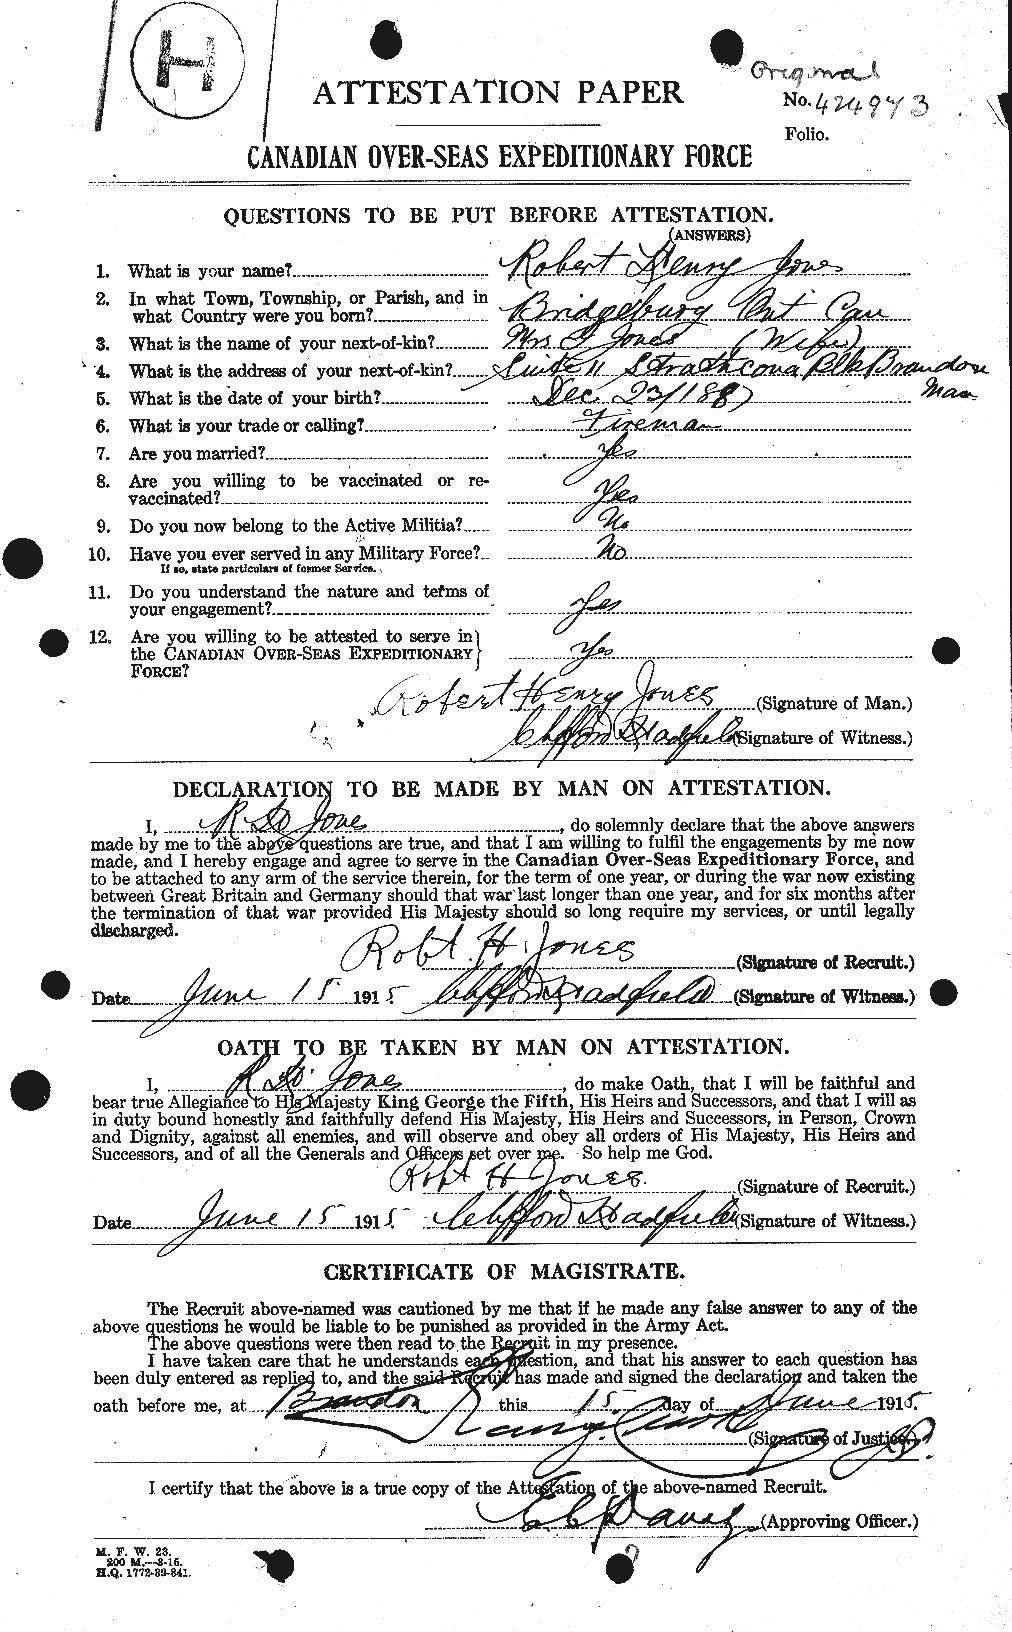 Personnel Records of the First World War - CEF 424955a